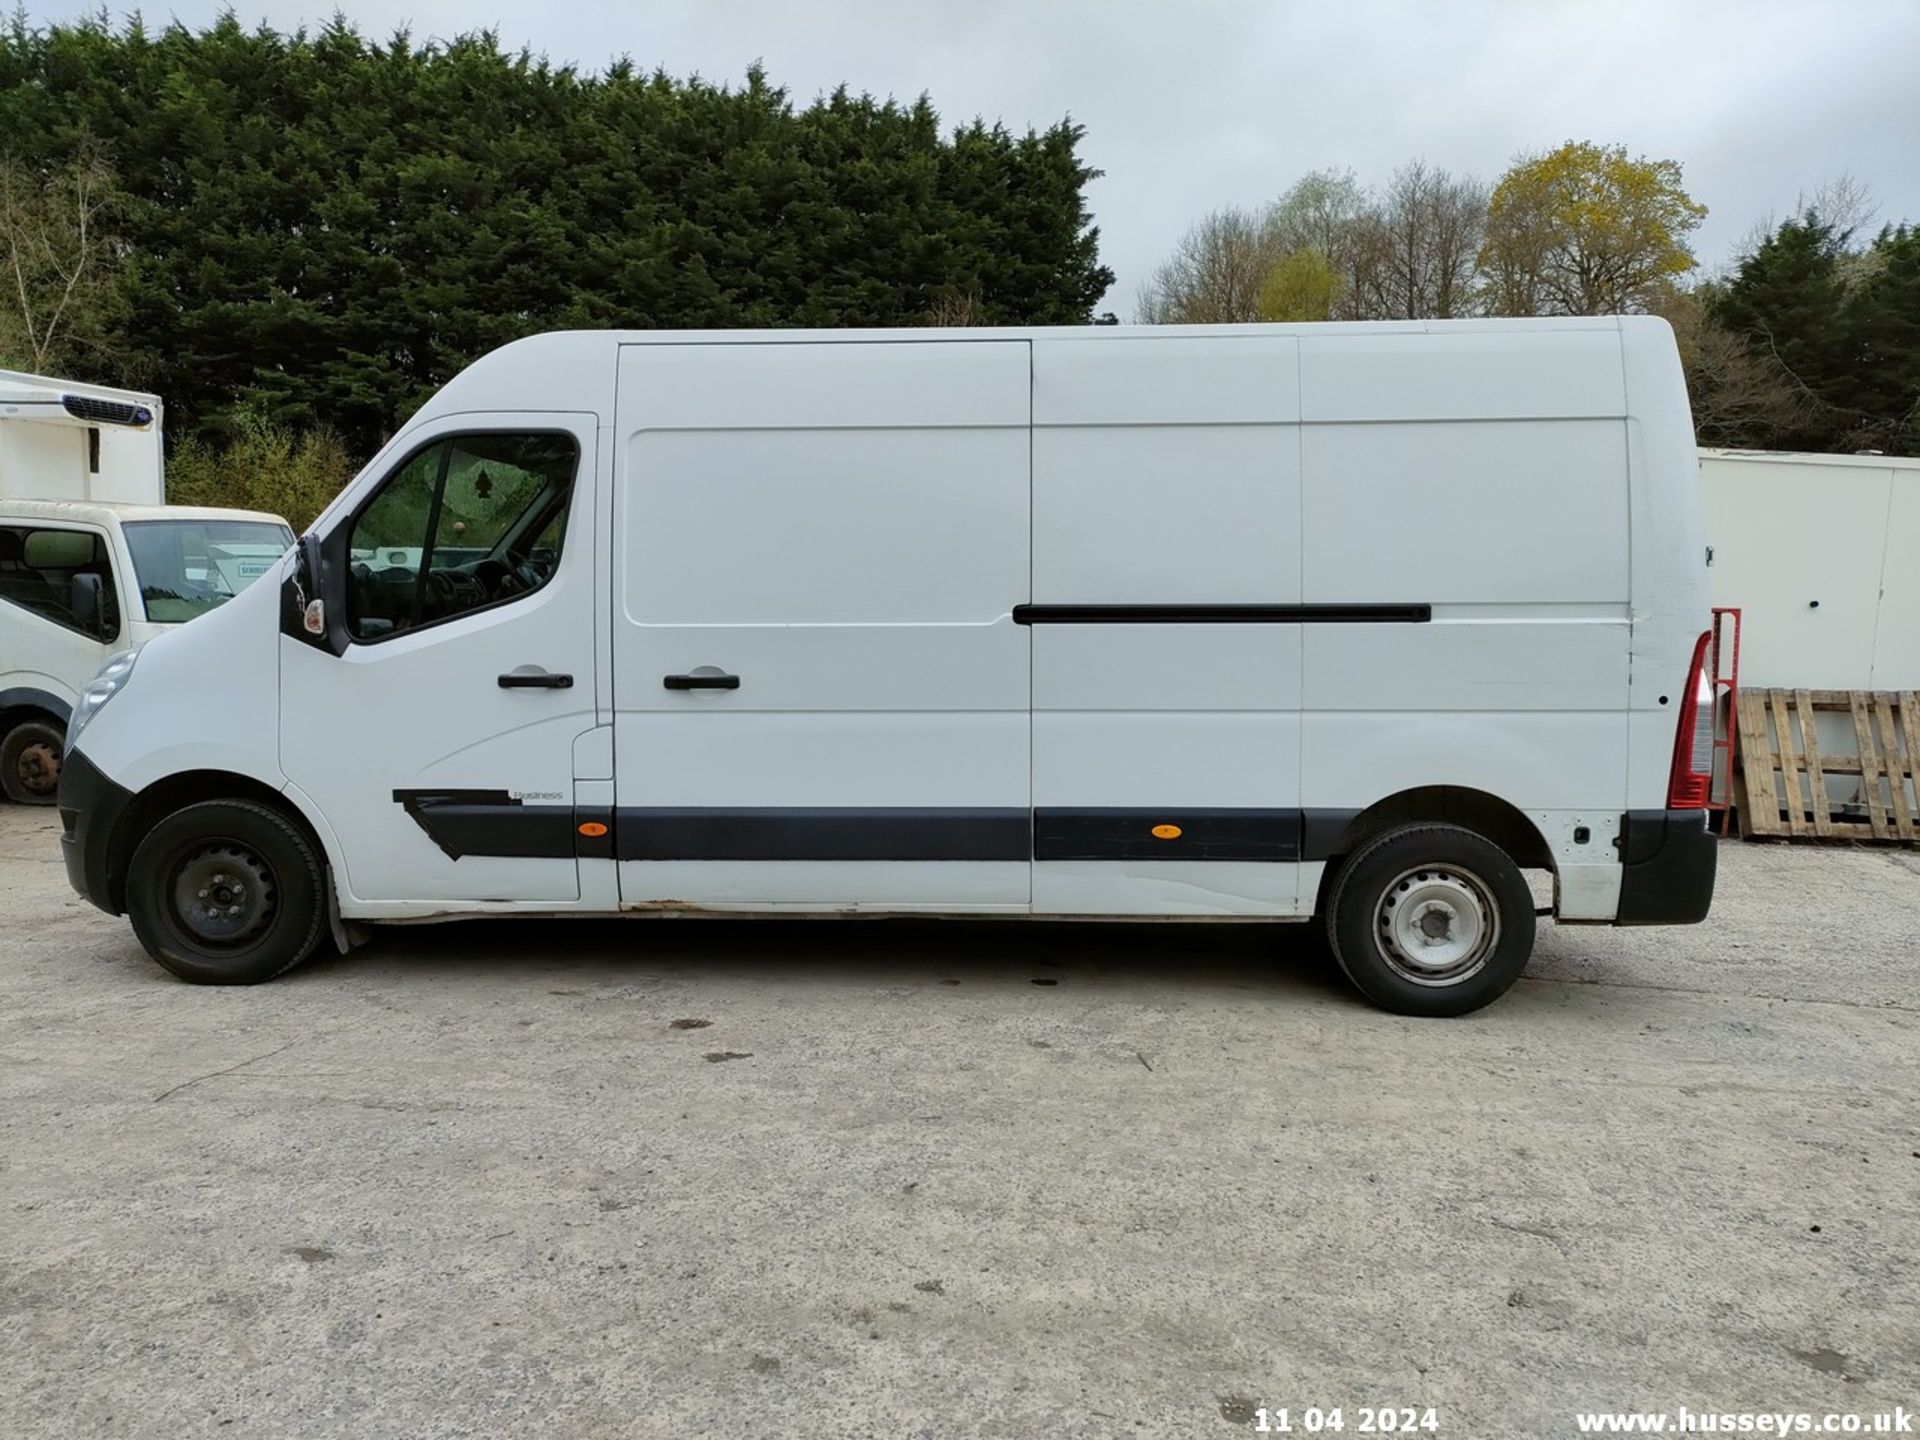 18/68 RENAULT MASTER LM35 BUSINESS DCI - 2298cc 5dr Van (White) - Image 21 of 68